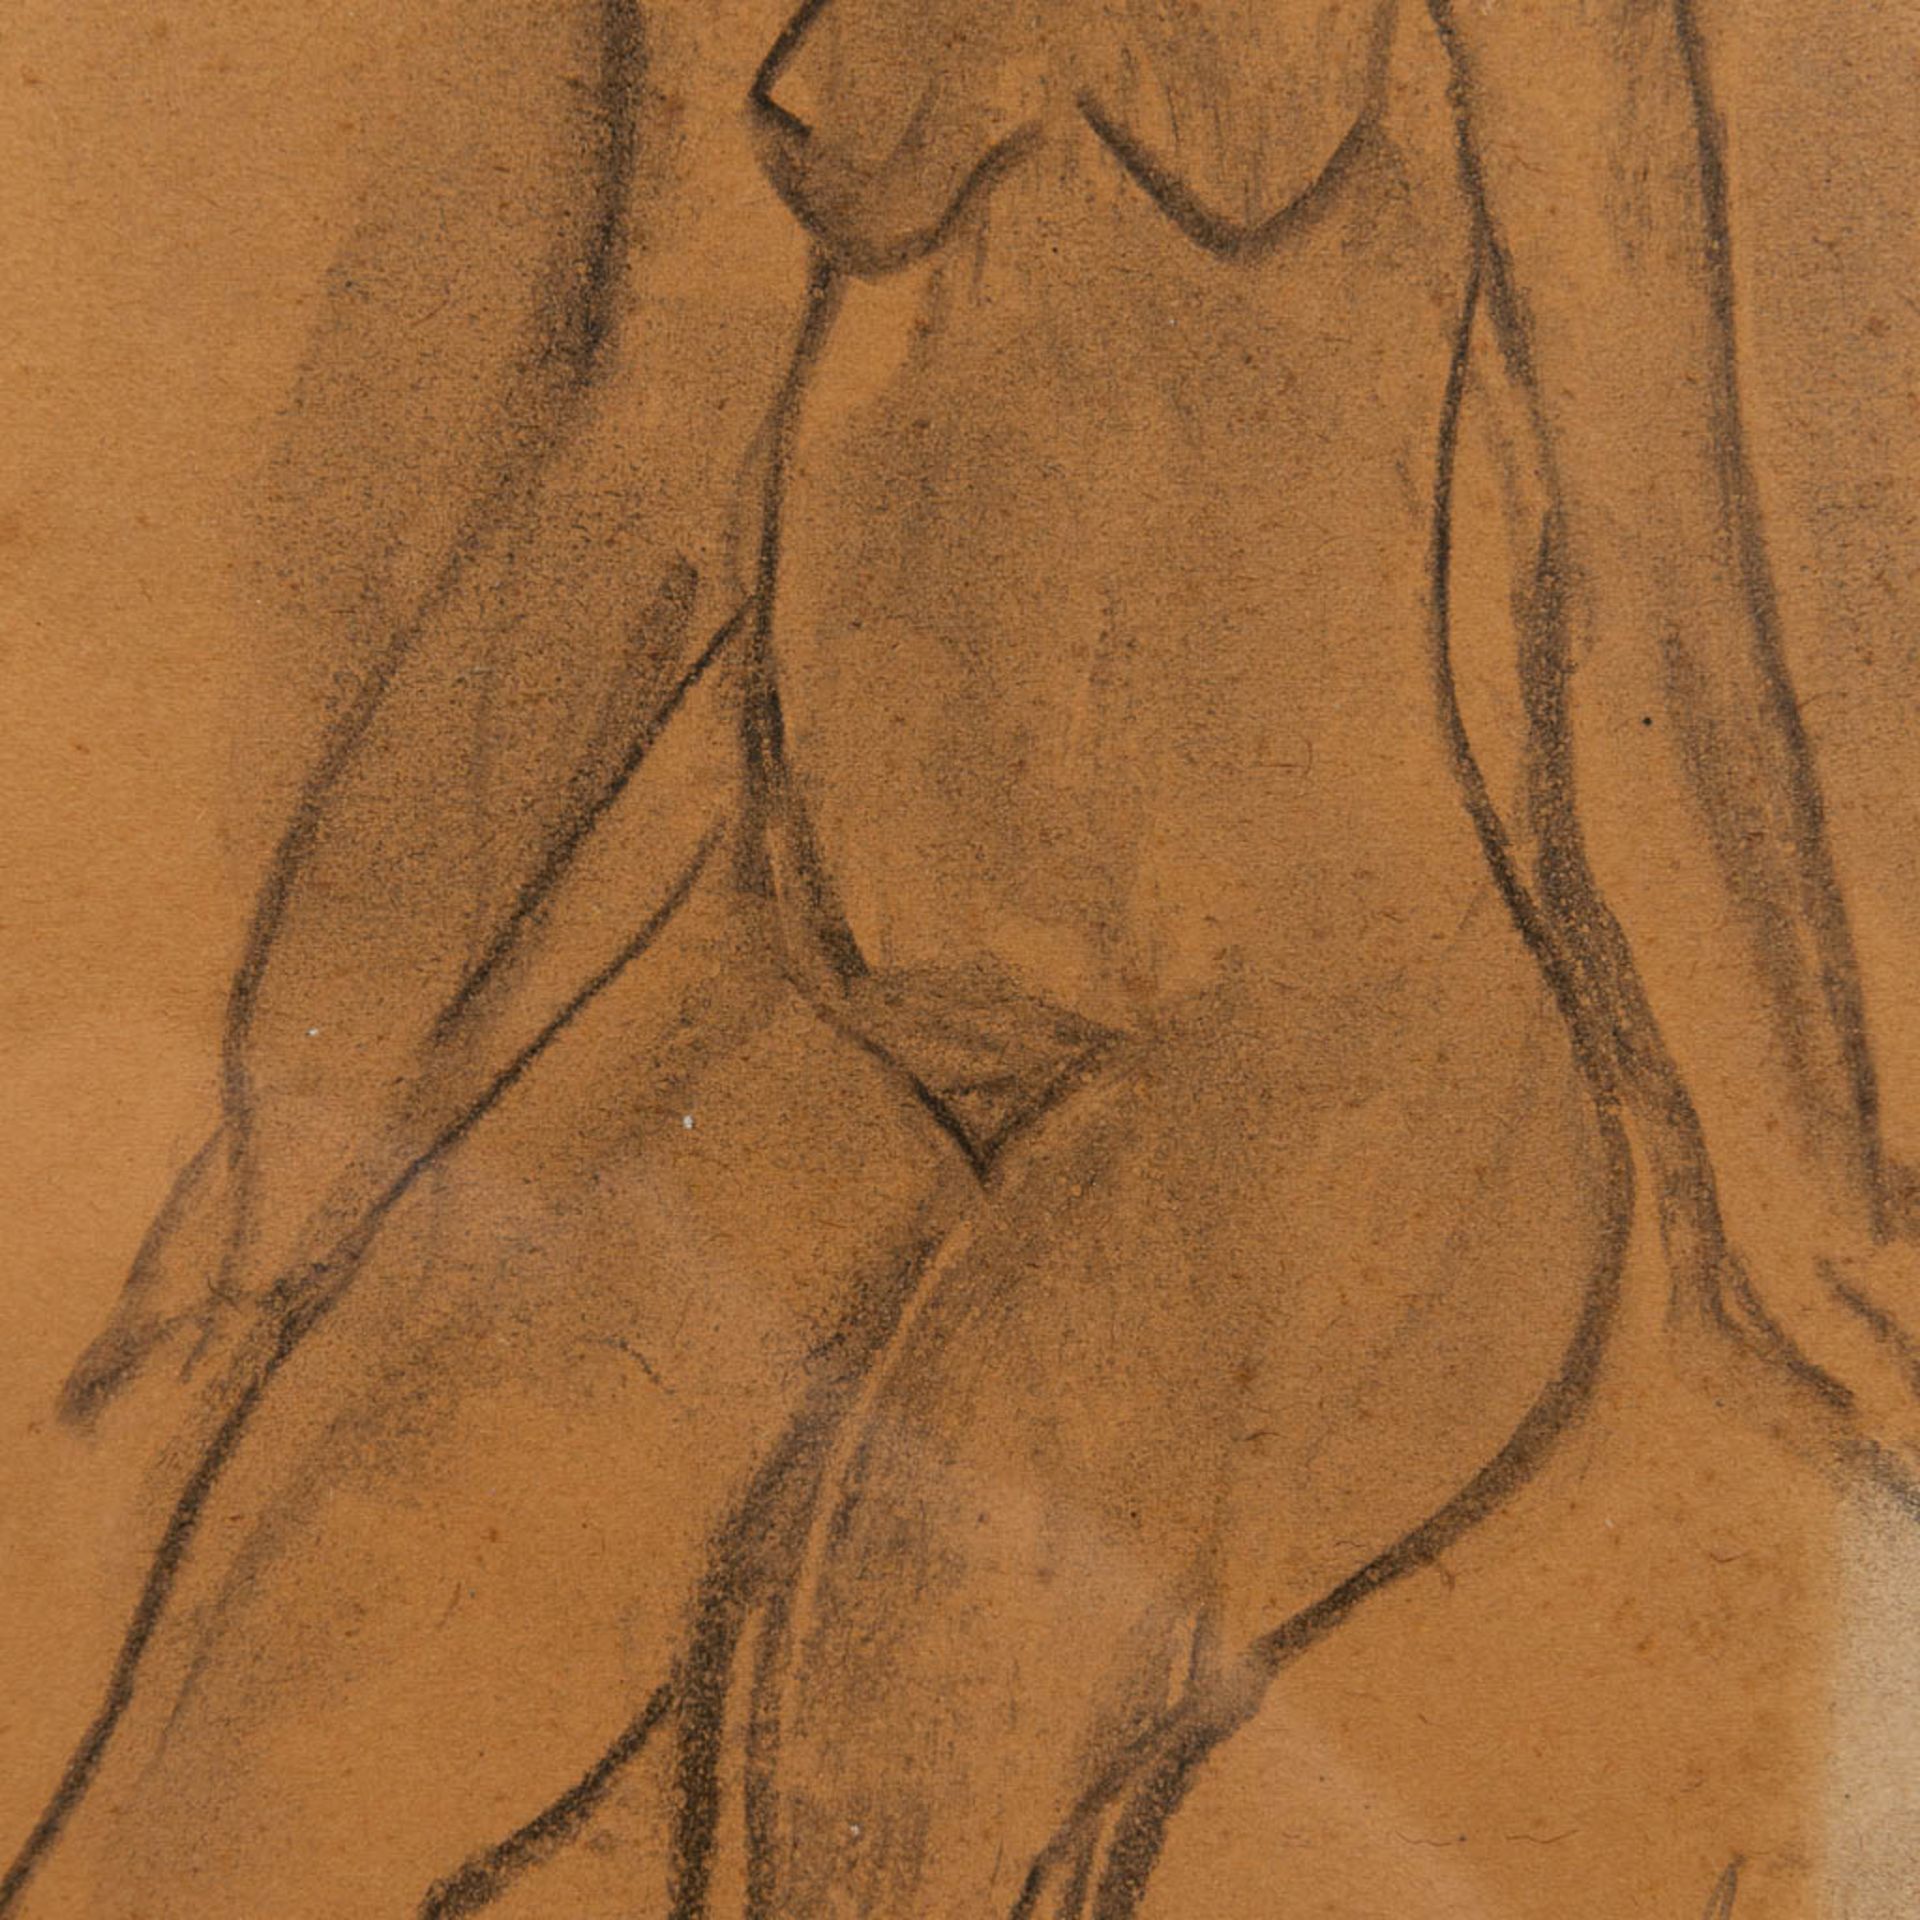 Constant PERMEKE (1886-1952) 'sitting naked' a drawing, pencil on paper. (17 x 25 cm) - Image 8 of 10